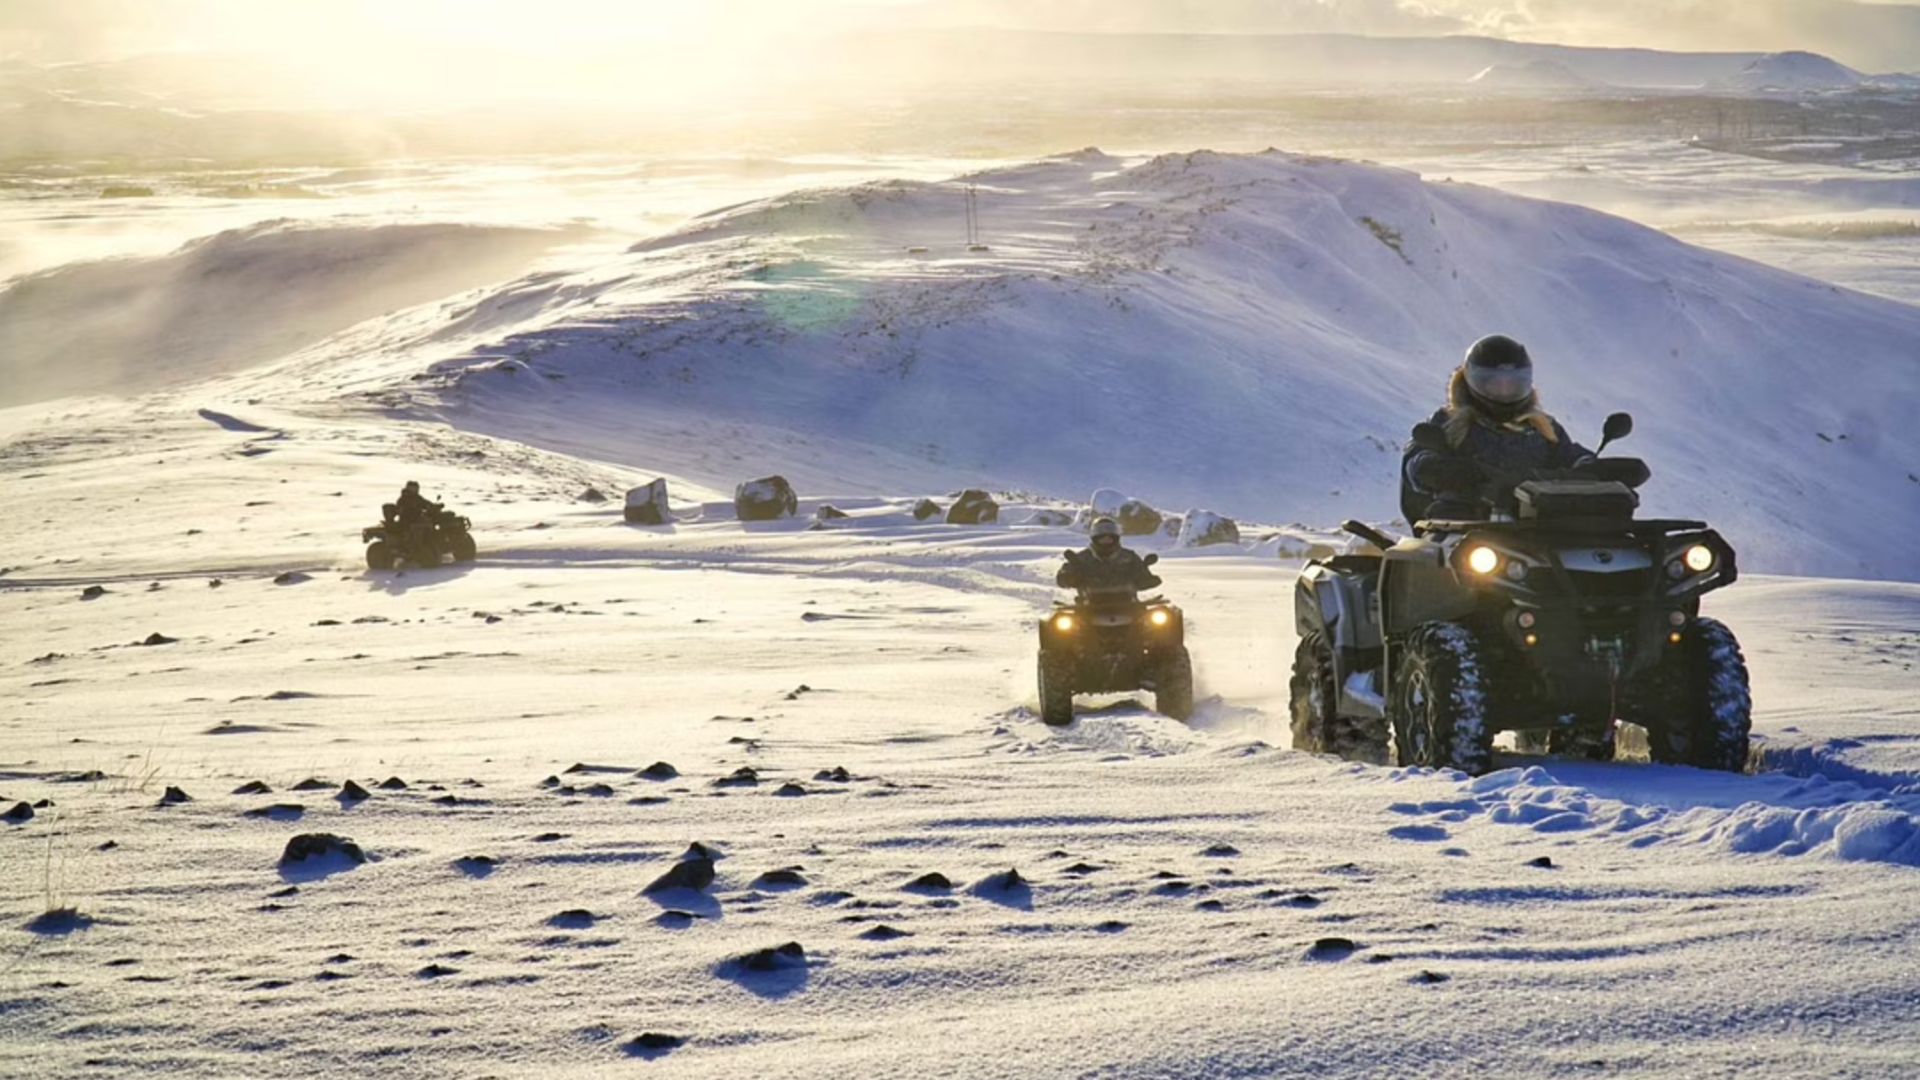 ATV tour in Iceland in snow